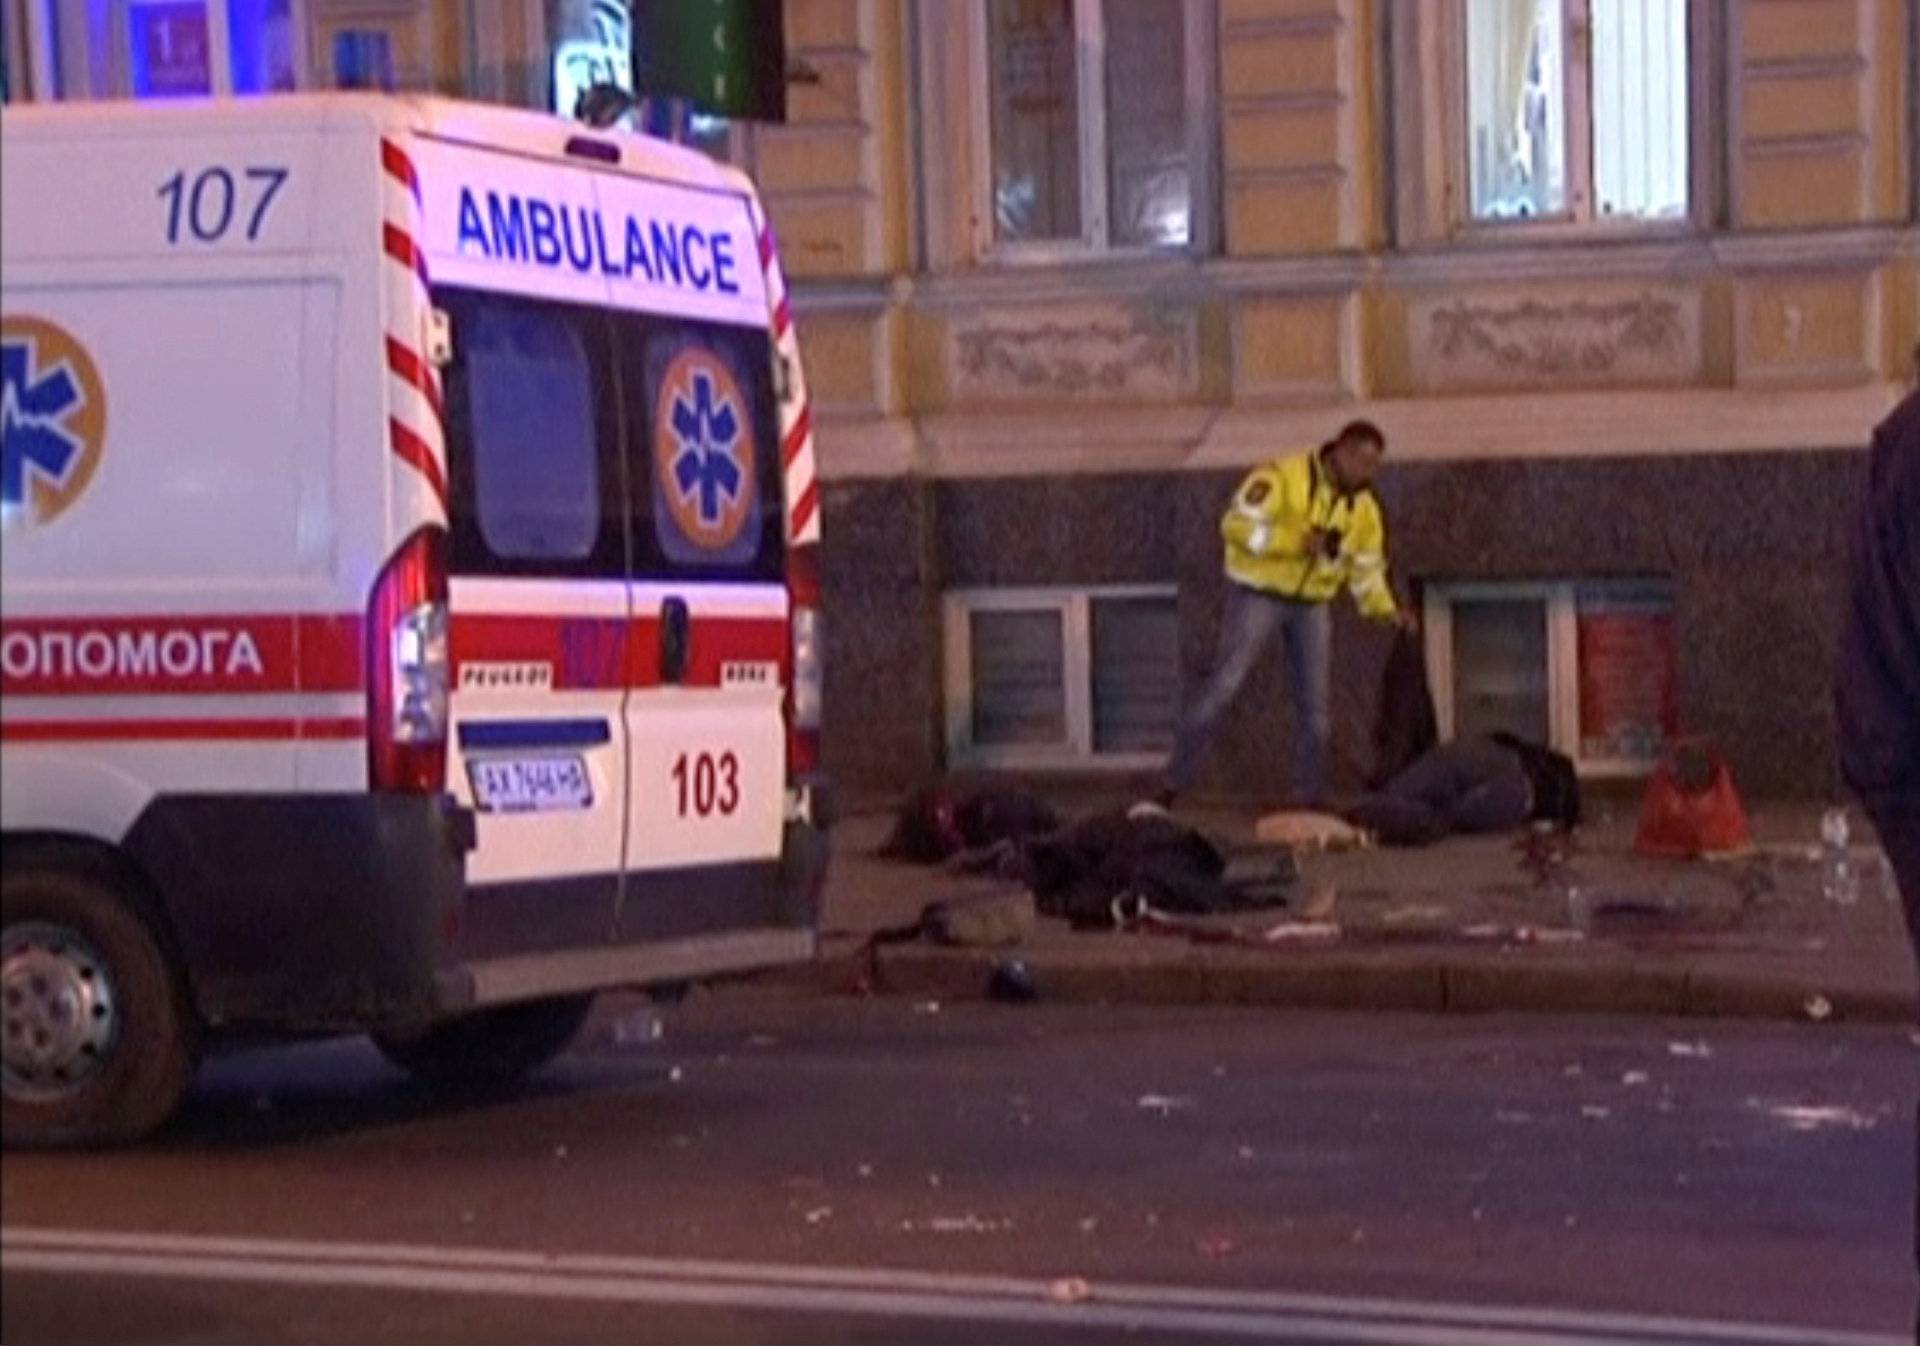 A still image taken from a video shot on October 18, 2017, shows bodies laying on the ground next to an ambulance at the accident scene after a car drove into pedestrians following a vehicle collision in central Kharkiv